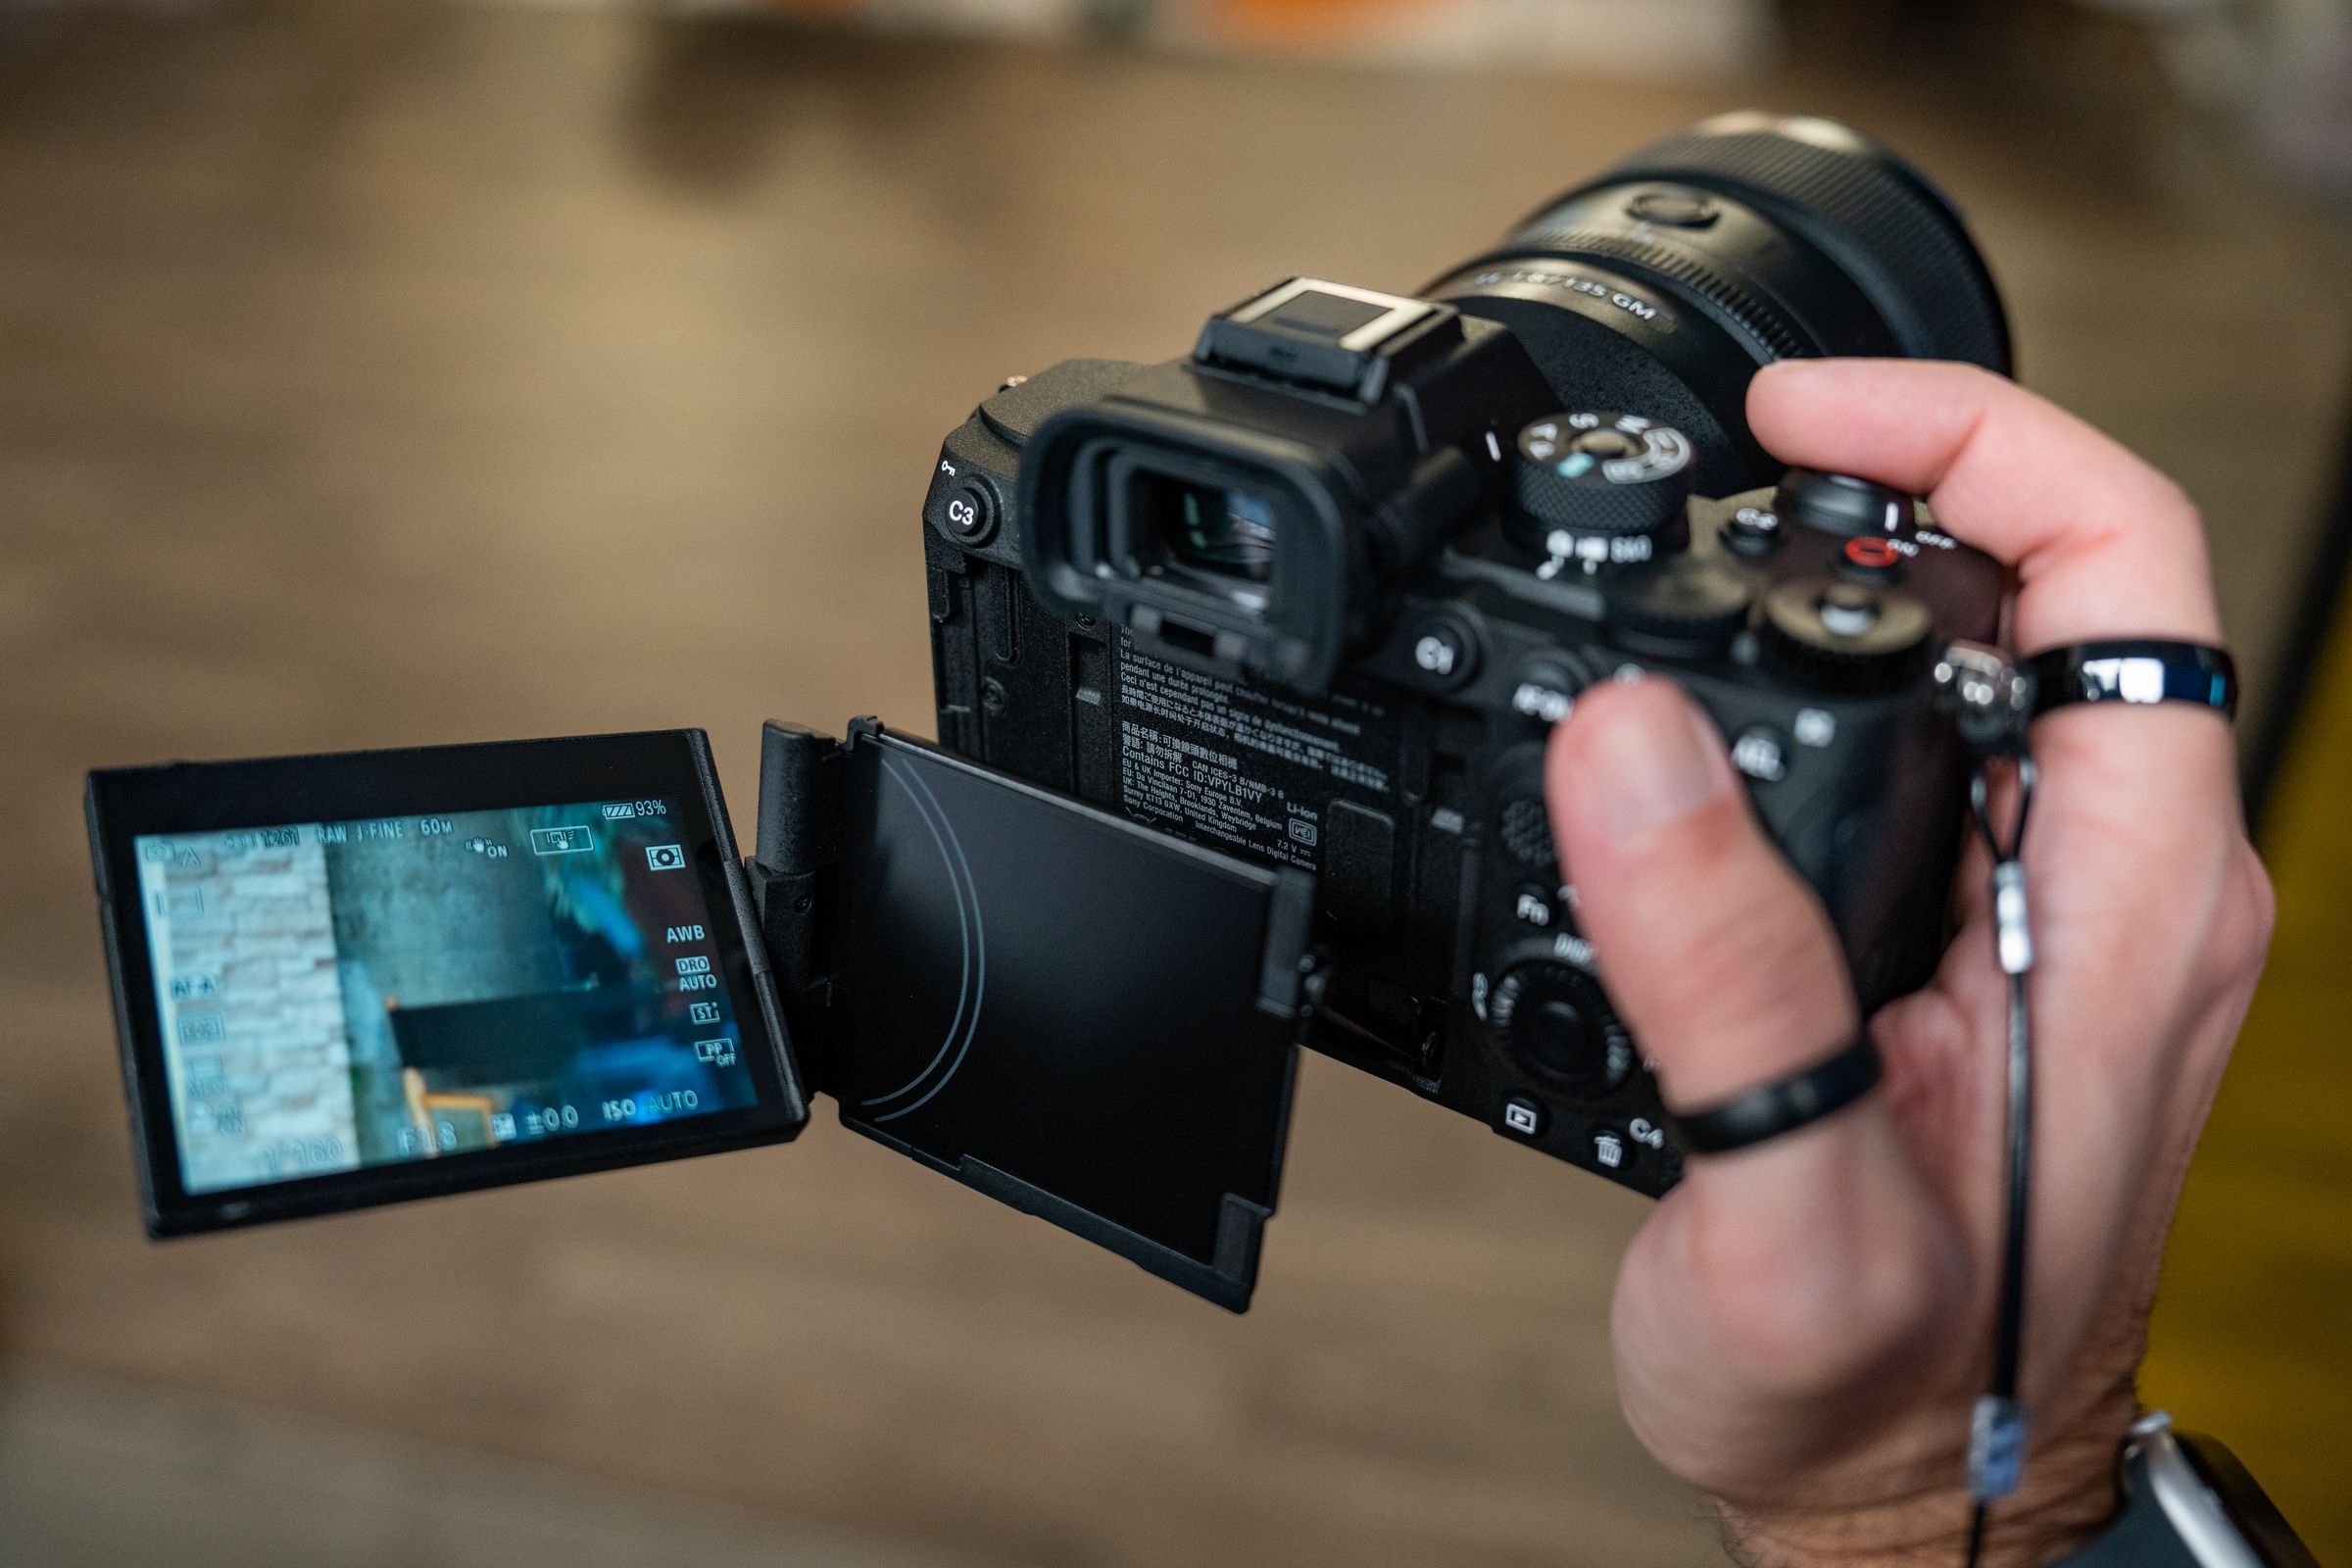 The rear display swings out and swivels like many other cameras but also tilts down or up. It allows for many more angles of use, and is much faster to deploy to quickly shoot from the hip or above your head when compared to models that only unfold to the left.